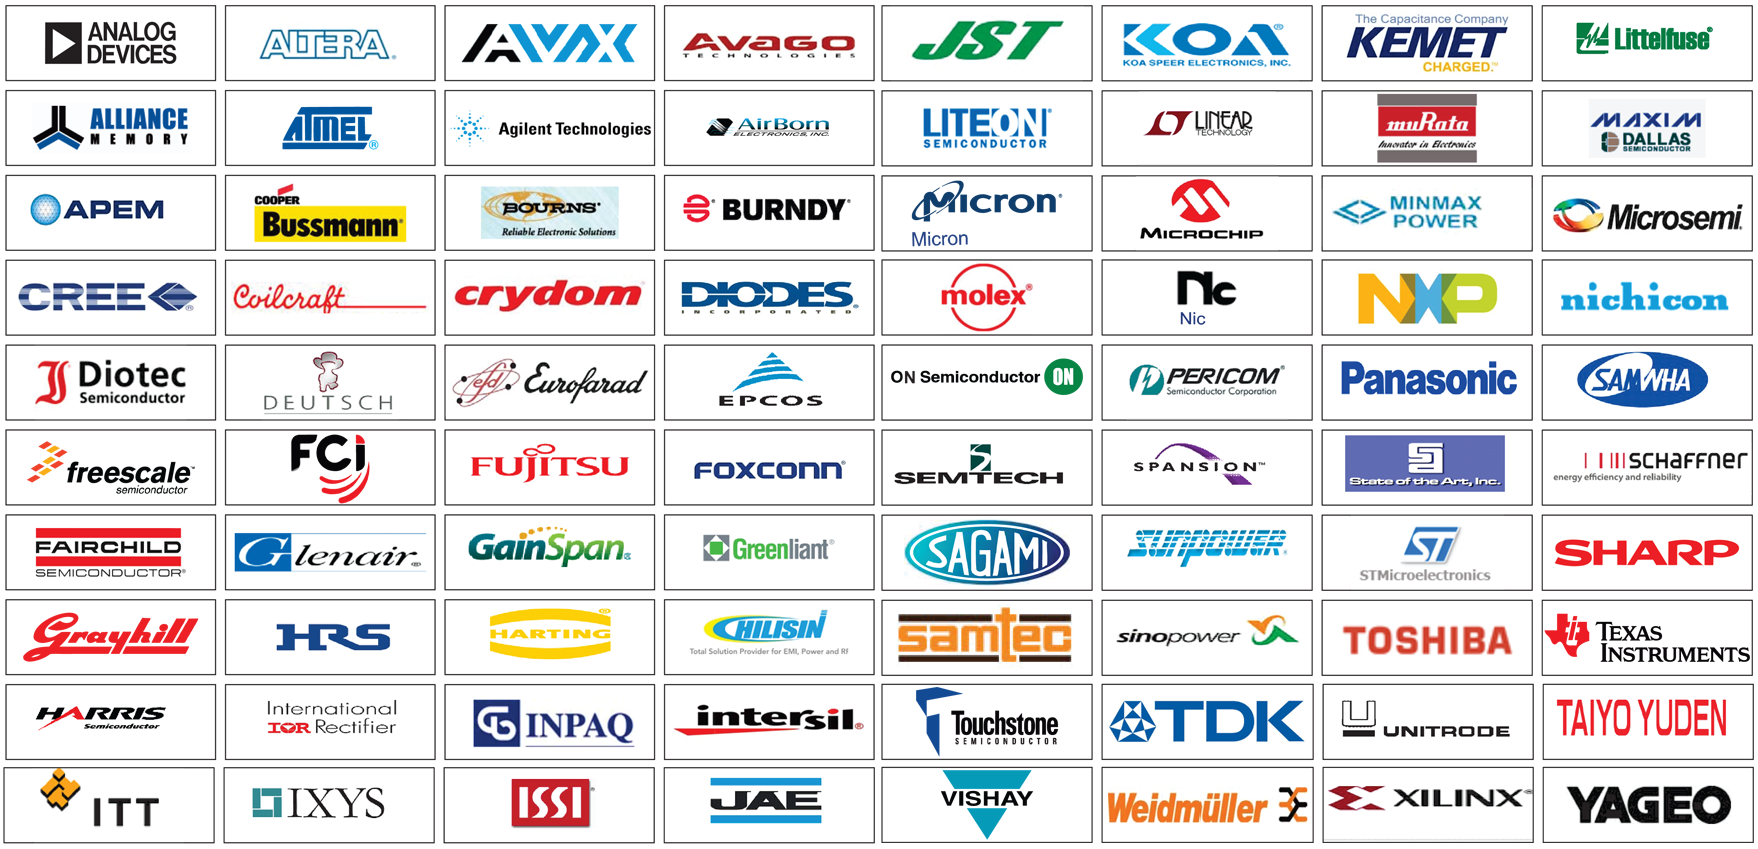 The 80 brands we offer alternatives for. This are: Analog Devices, Altera, AVX, Avago Technologies, Alliance Memory, Atmel, Agilent Technologies, AirBorin Electronics Inc, Apem, Cooper Bussman (now Eaton), Bourns Reliable Electronic Solutions, Burndy, Cree, Coilcraft. Crydom, Diodes Incorporated, Diotec Semiconductor, Deutsch, Eurofarad, Epcos, Freescale Semiconductor, FCI, Fujitsu, Foxconn, Fairchild Semiconductor, Glenair, Gainspan, Greenliant, Grayhill, HRS, Harting, Hilisin, Harris Semiconductor, International Ior Rectifier, Inpaq, Intersil, ITT, IXYS, ISSI, JAE, JST, KOA Speer Electronics Inc, Kemet Charged, Littlefuse, LiteOn Semiconductor, Linear Technology, muRata, Maxim Dallas Semiconductor, Micron, Microchip, Minmax Power, Microsemi, Molex, Nic, NXP, Nichicon, On Semiconductor, Pericom Semiconductor Corporation, Panasonic, Samwha, Semtech, Spansion, State of the Art Inc, Schaffner, Sagami, Sunpower, STMicroelectronics, Sharp, Samtec, Sinopower, Toshiba, Texas Instrumens, Touchstone Semiconductor, TDK, Unitrode, Taiyo Yuden, Vishay, Weidmüller, Xilinx and Yageo.